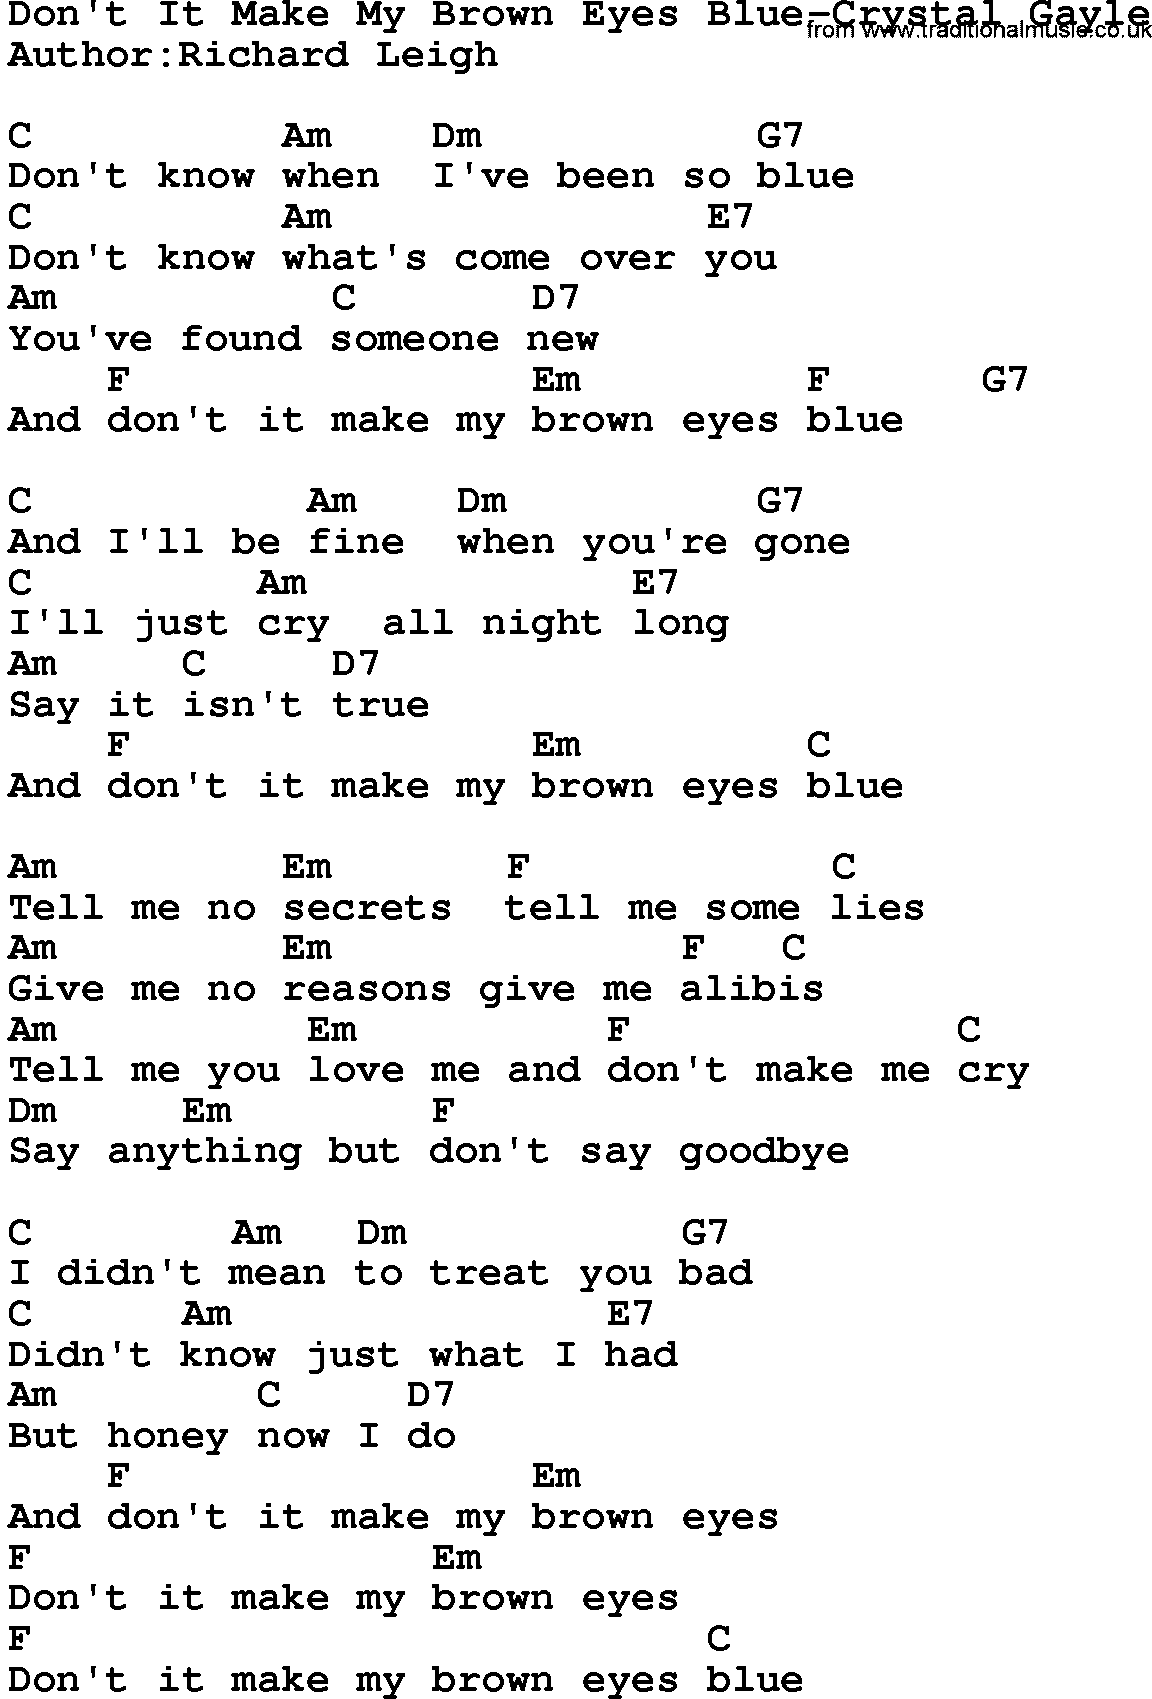 Country music song: Don't It Make My Brown Eyes Blue-Crystal Gayle lyrics and chords